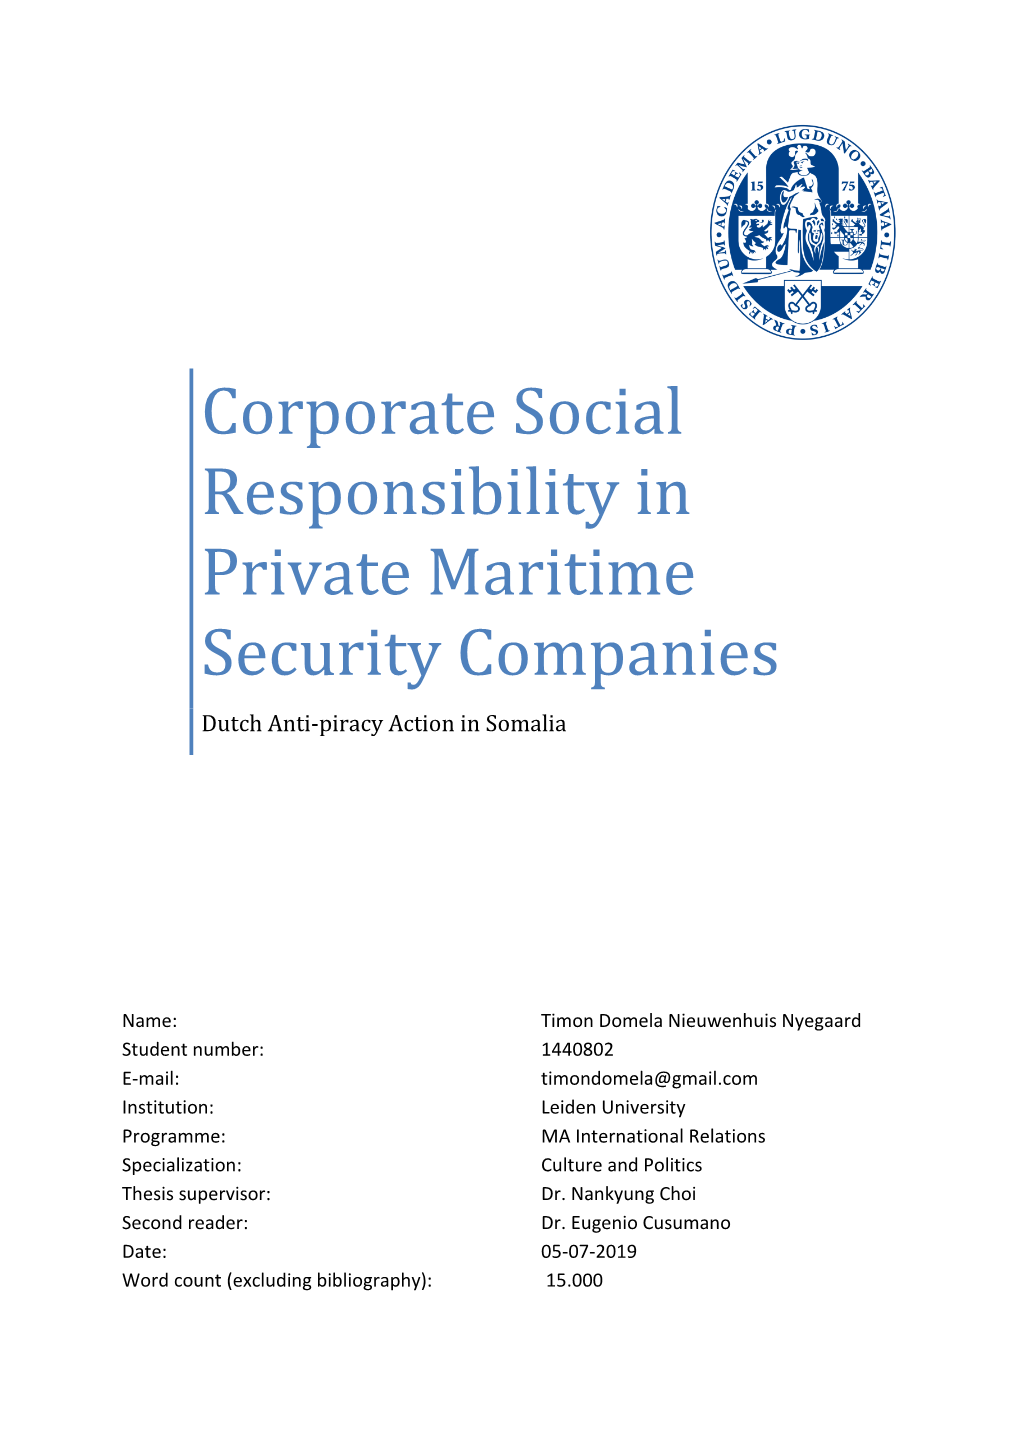 Corporate Social Responsibility in Private Maritime Security Companies